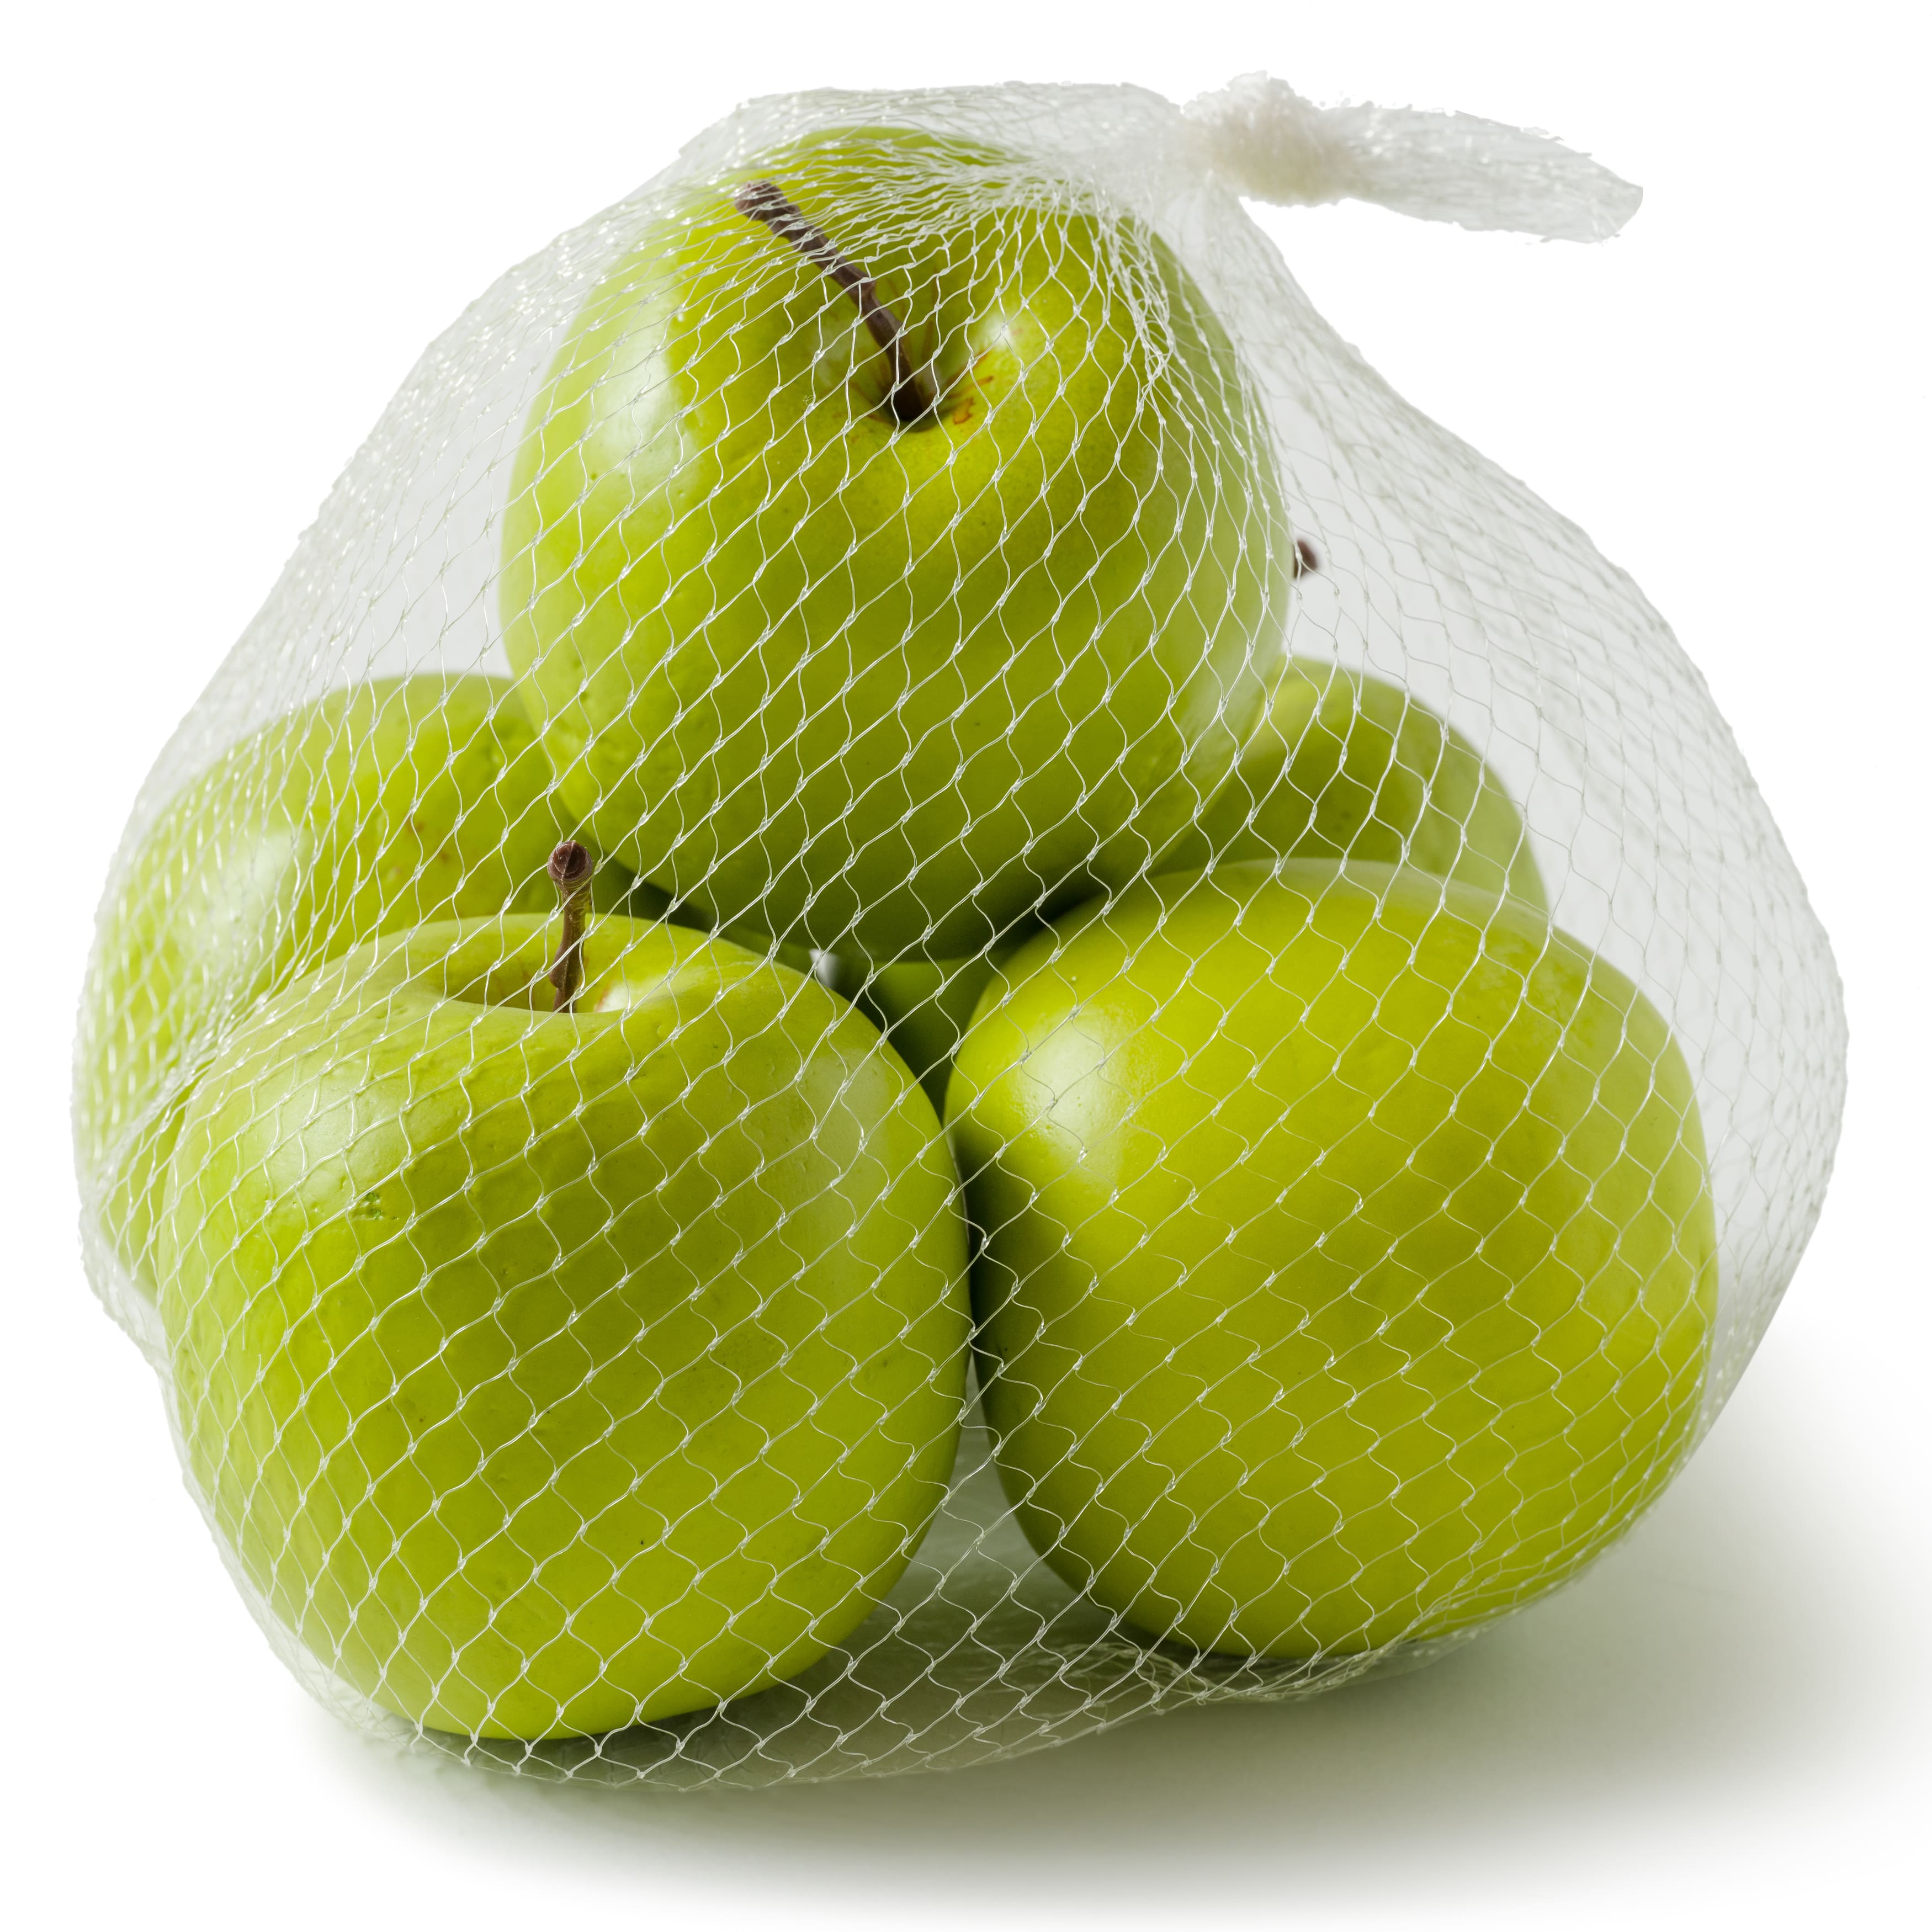 8 Packs: 5 ct. (40 total) Green Apples by Ashland&#xAE;